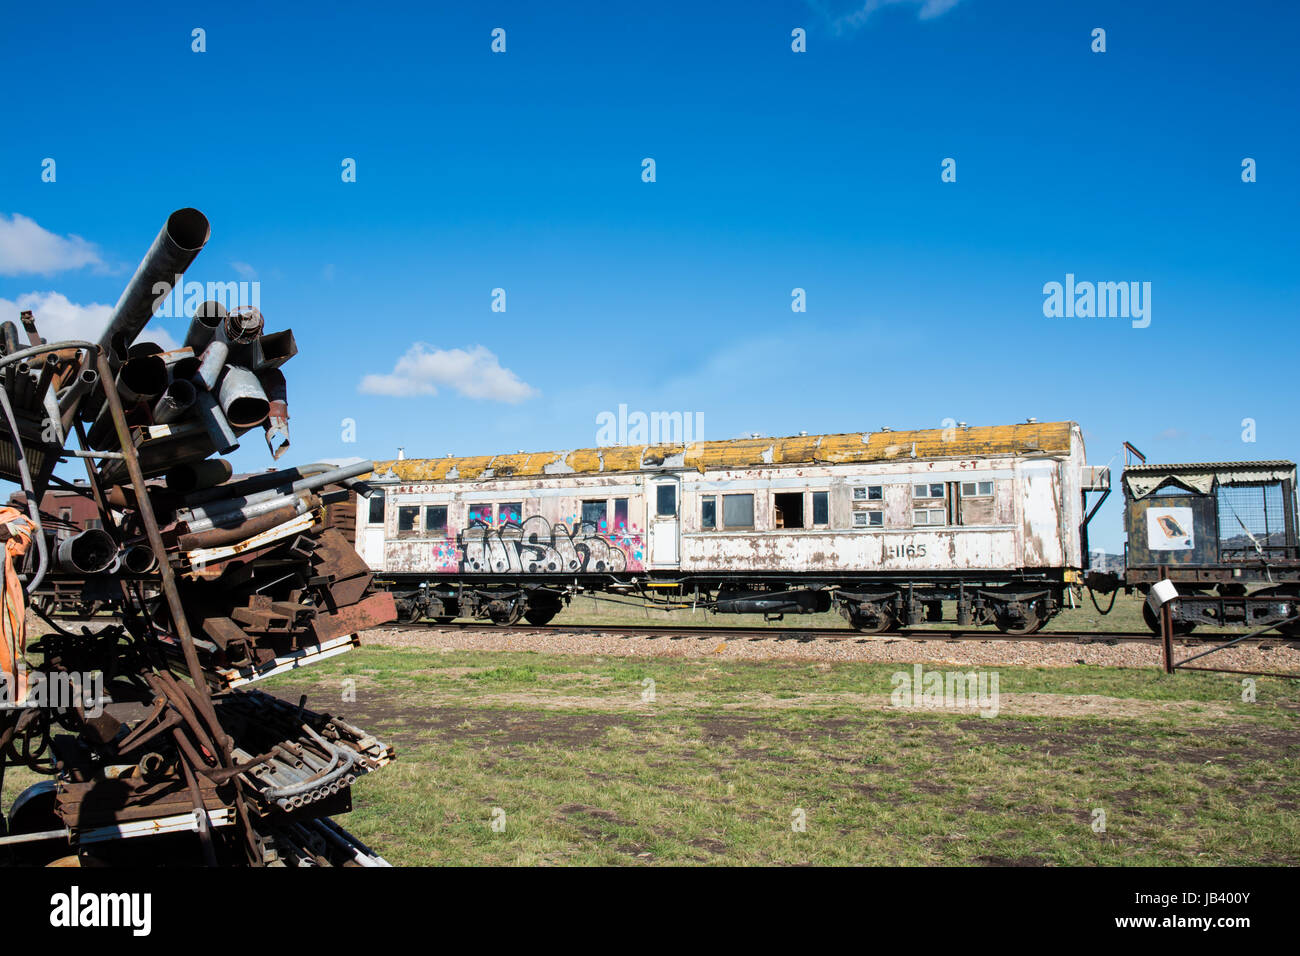 Old Railway Carriage Rolling Stock on a Siding. Stock Photo